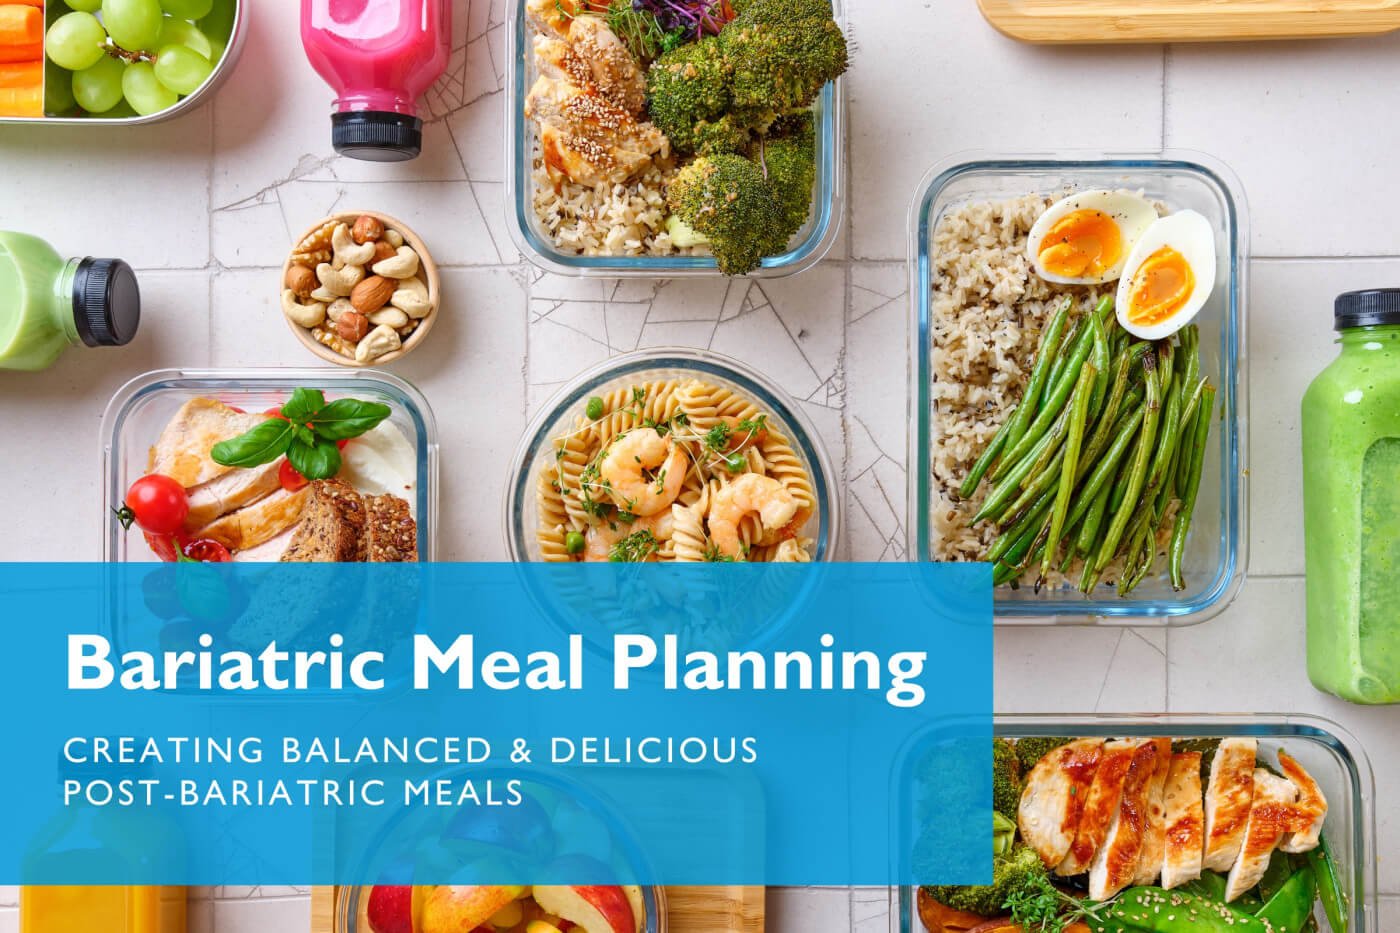 Bariatric Meal Planning 101 - Guide to creating healthy meals post bariatric surgery - Celebrate Vitamins